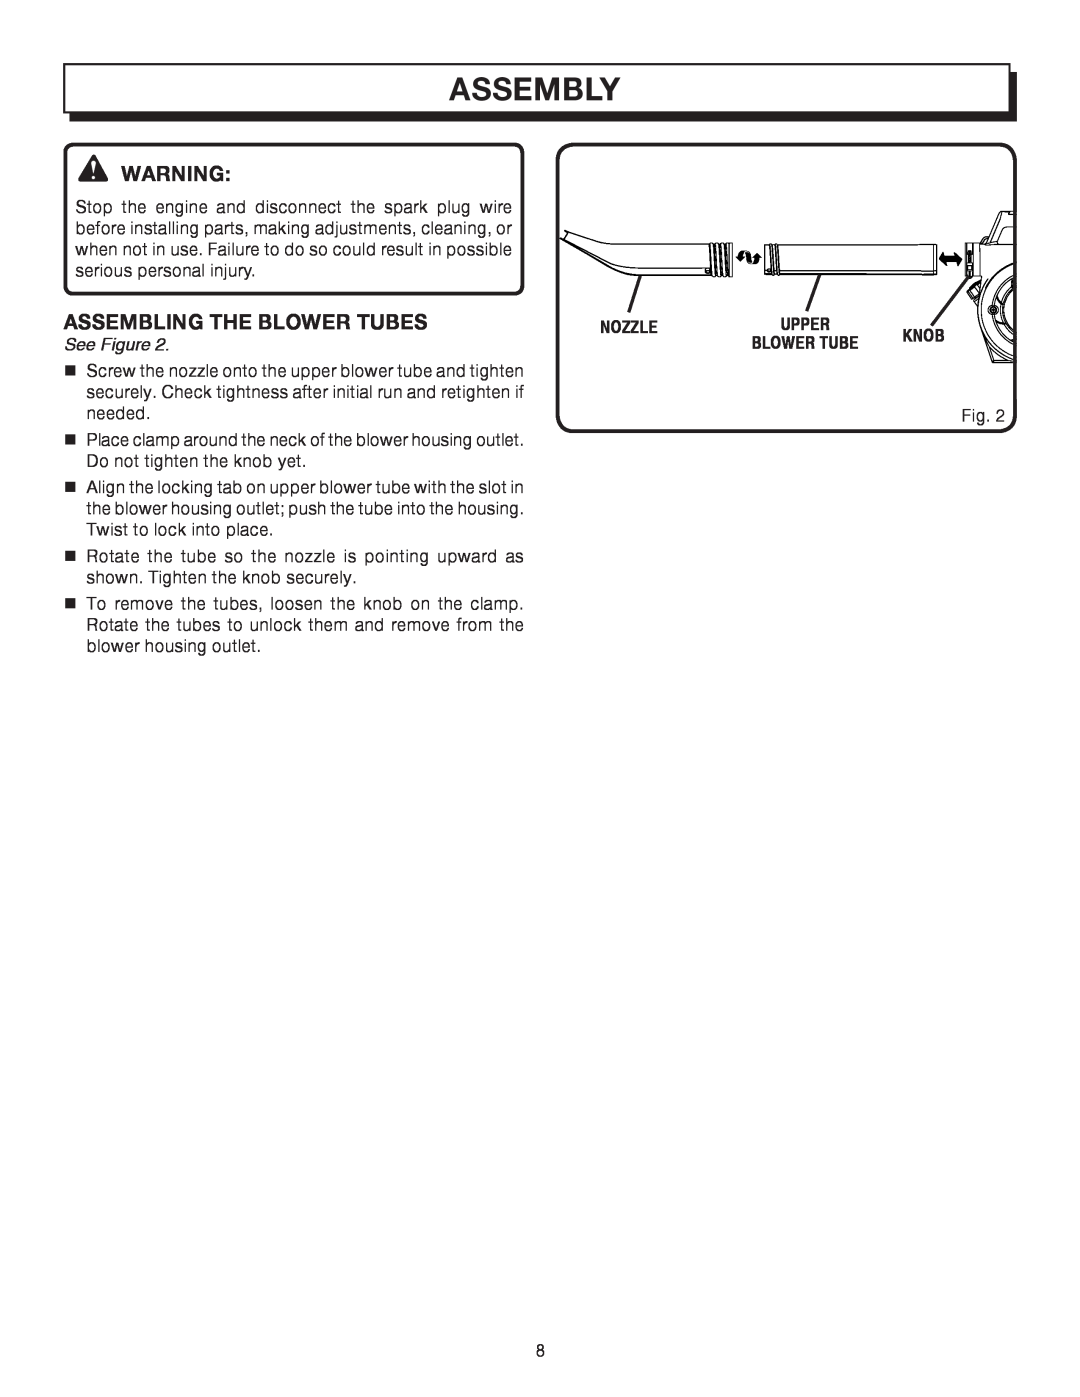 Homelite UT08512A manual Assembly, Assembling The Blower Tubes, See Figure, Nozzle 